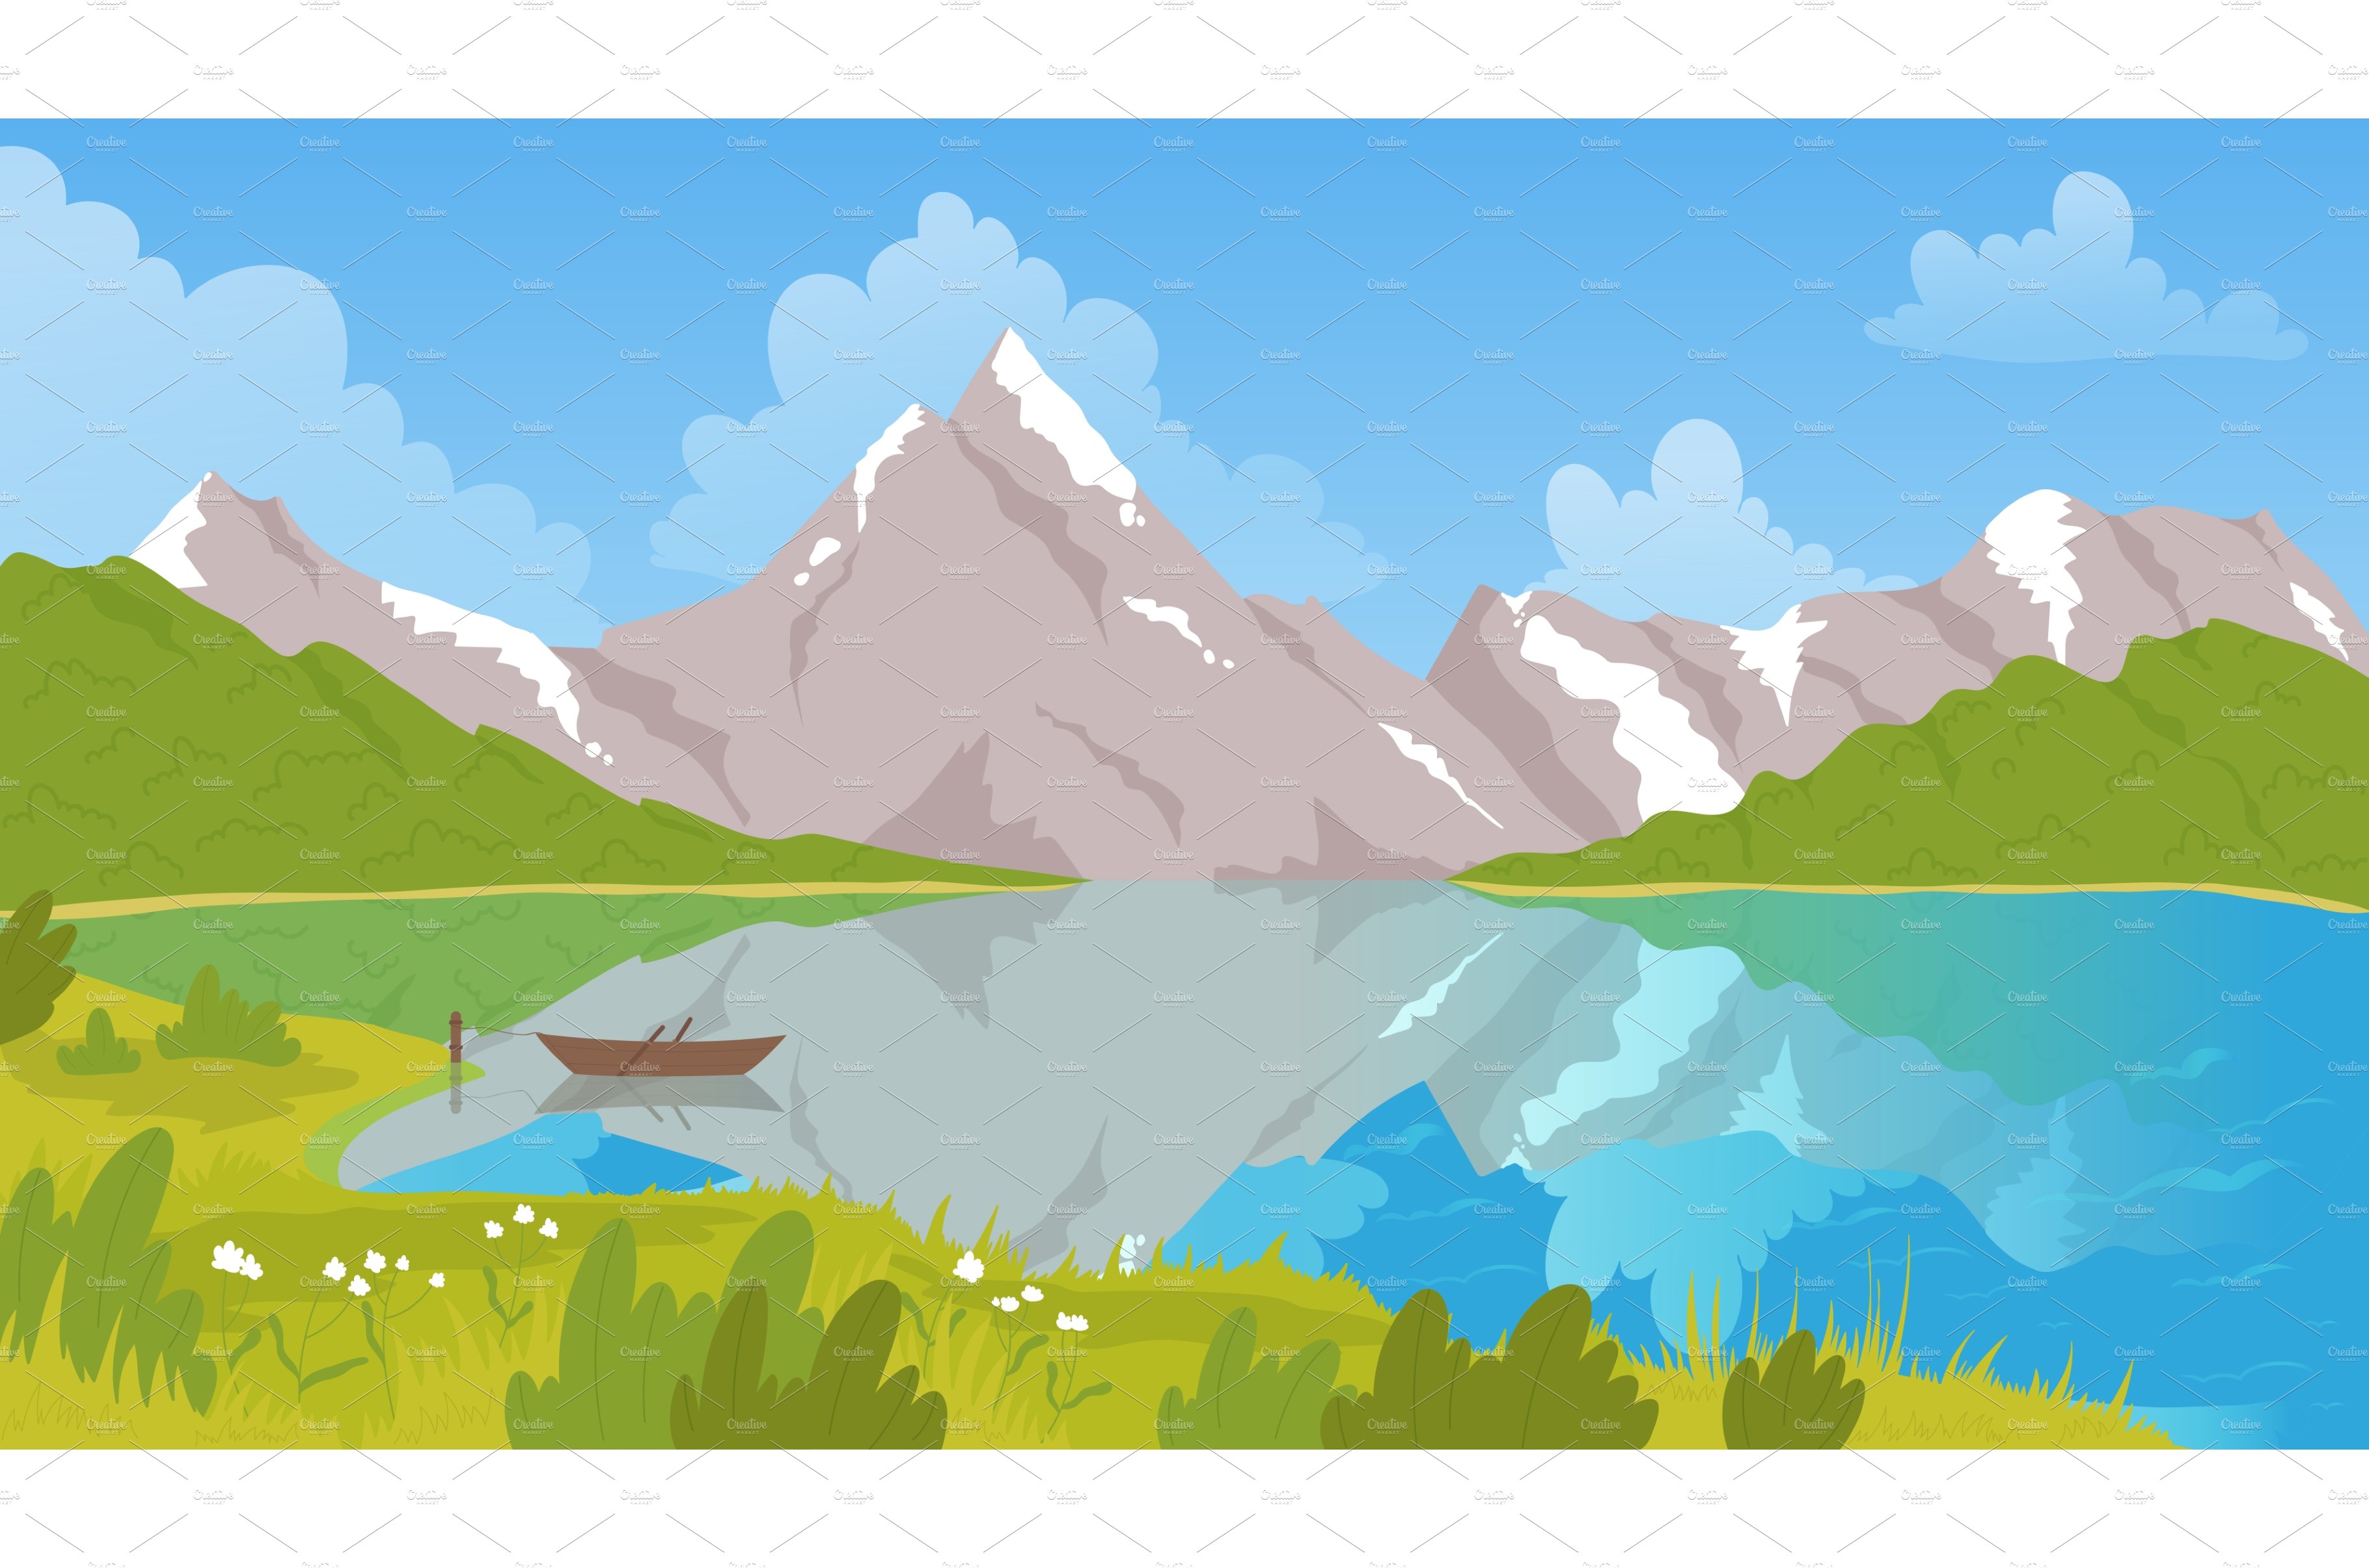 Mountain lake and boat landscape cover image.